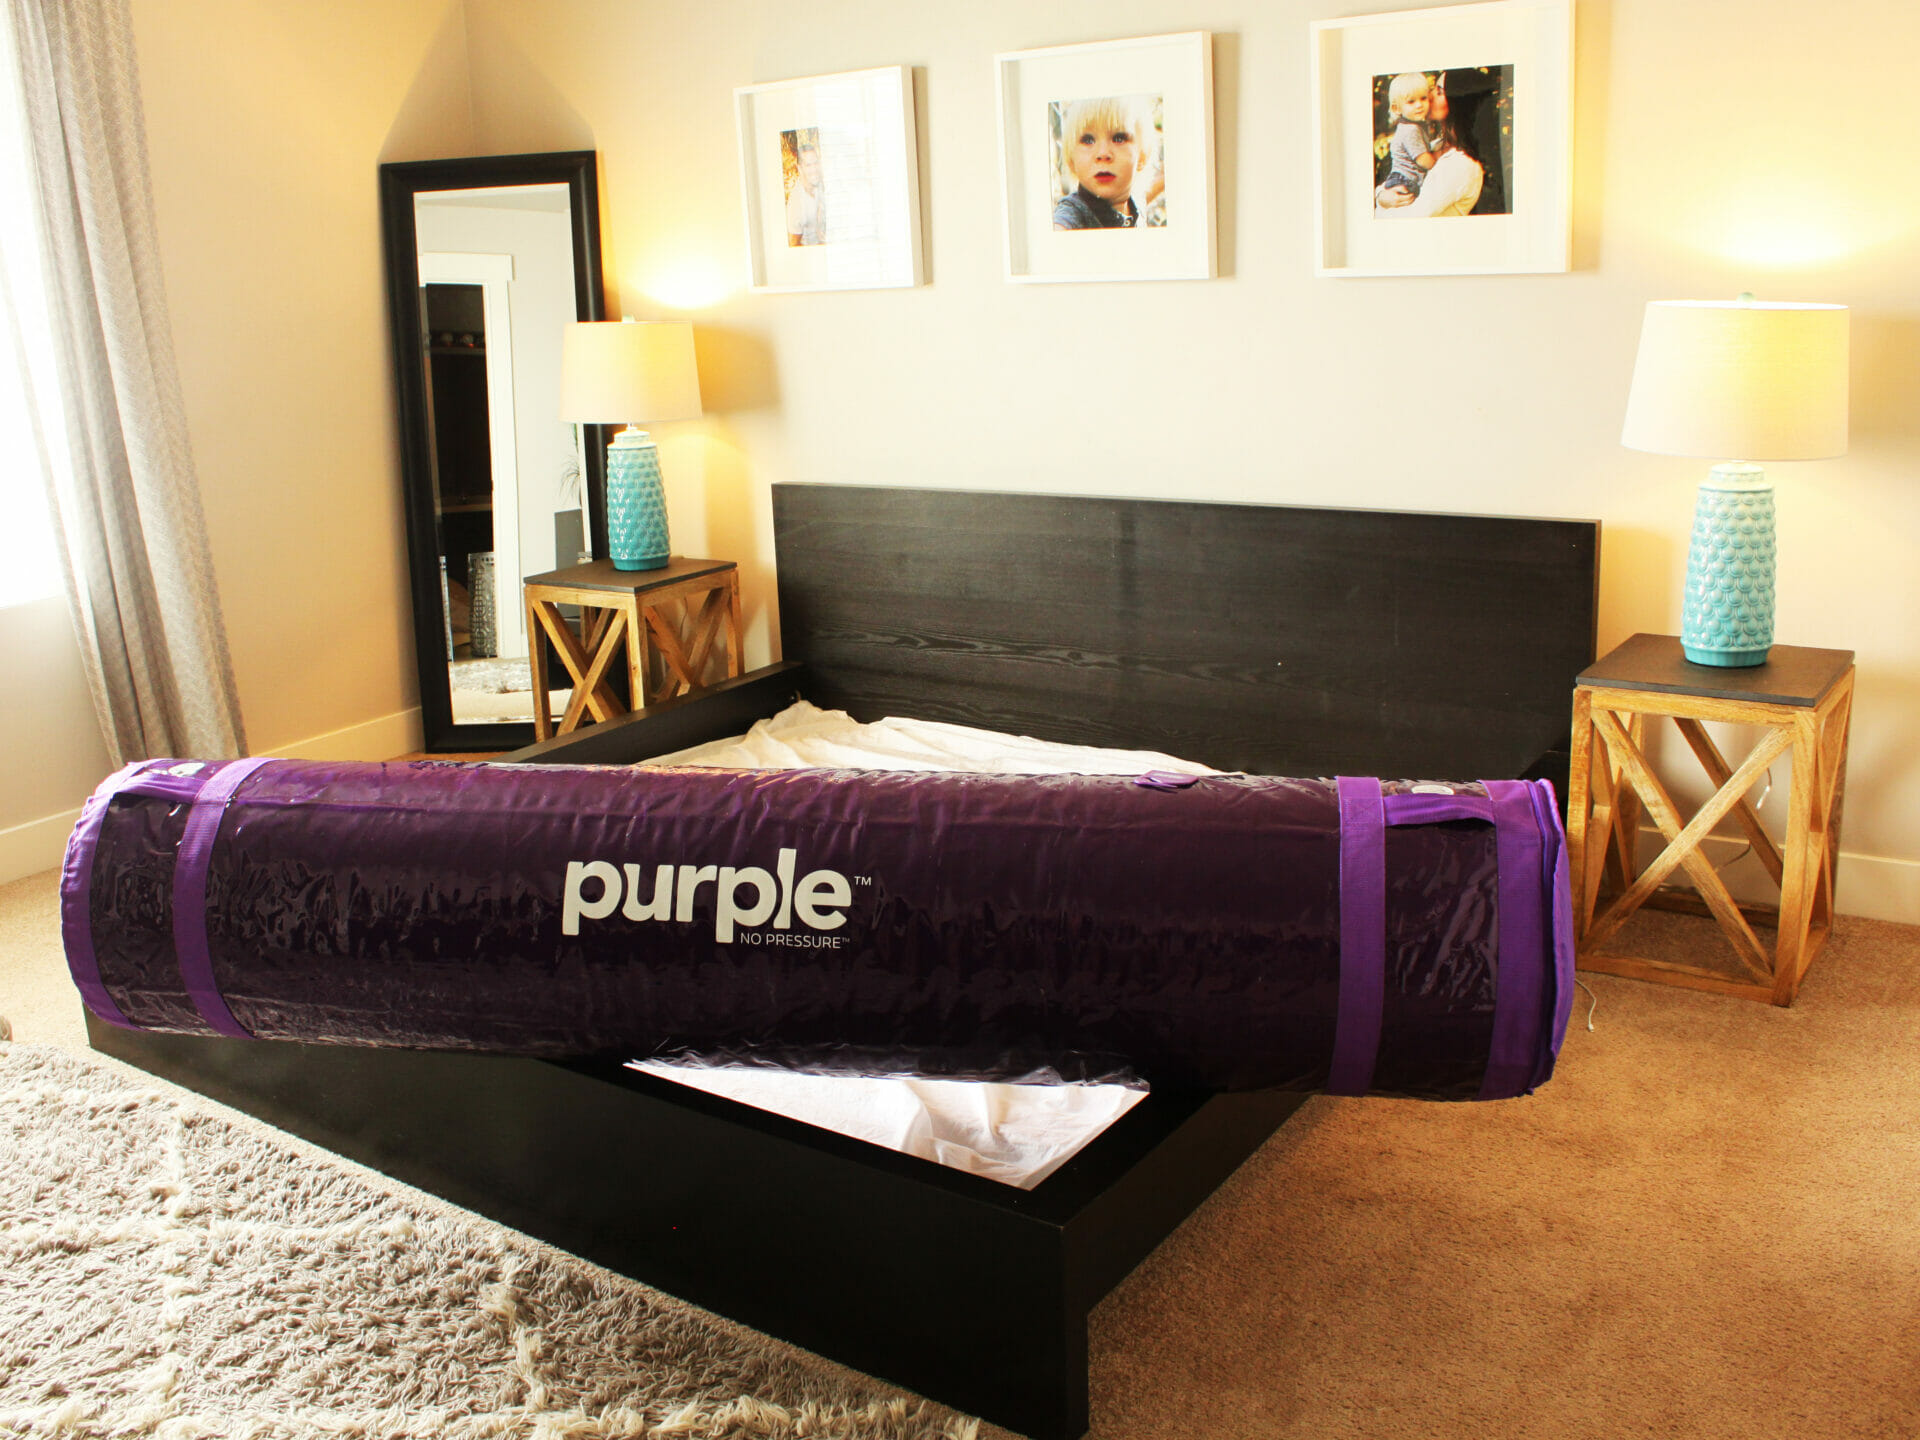 How Thick Is The Purple Mattress